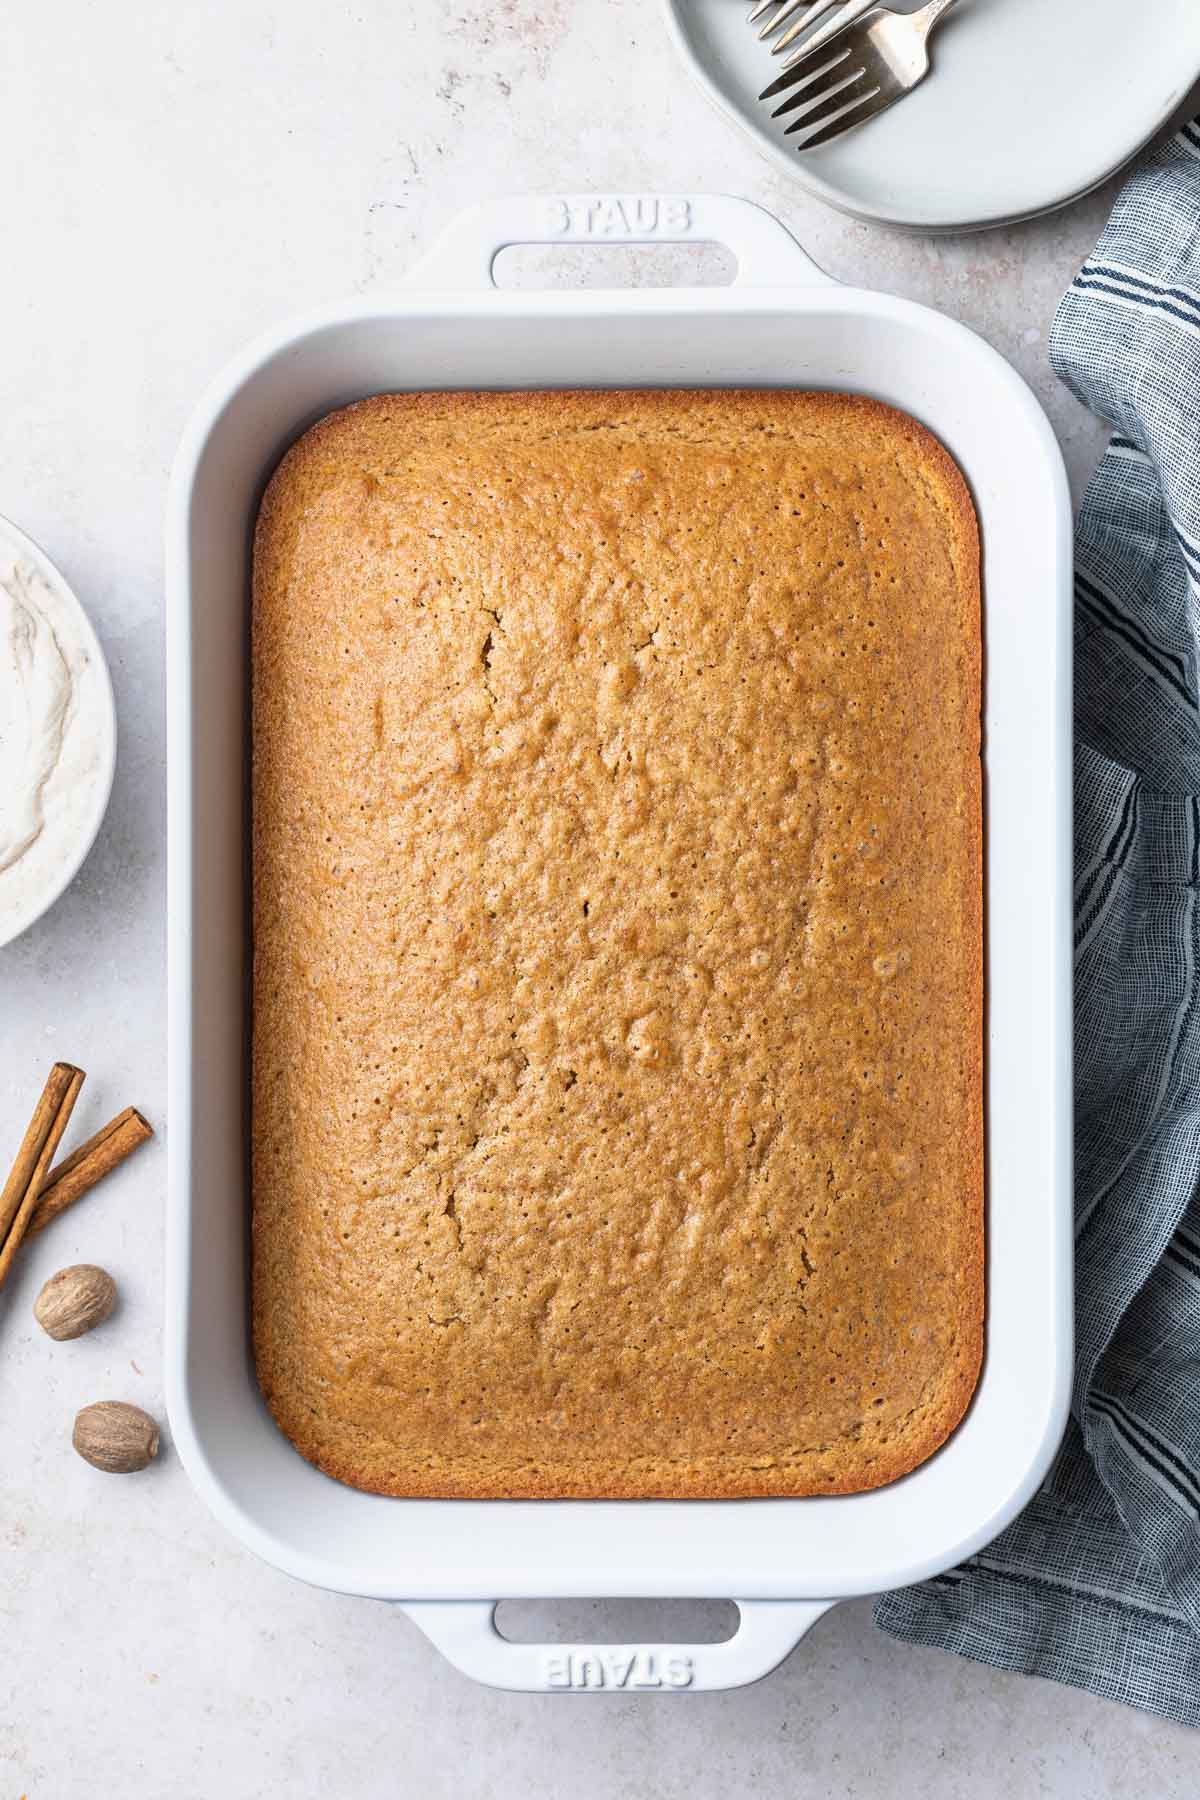 A plain baked caked in a casserole dish. 